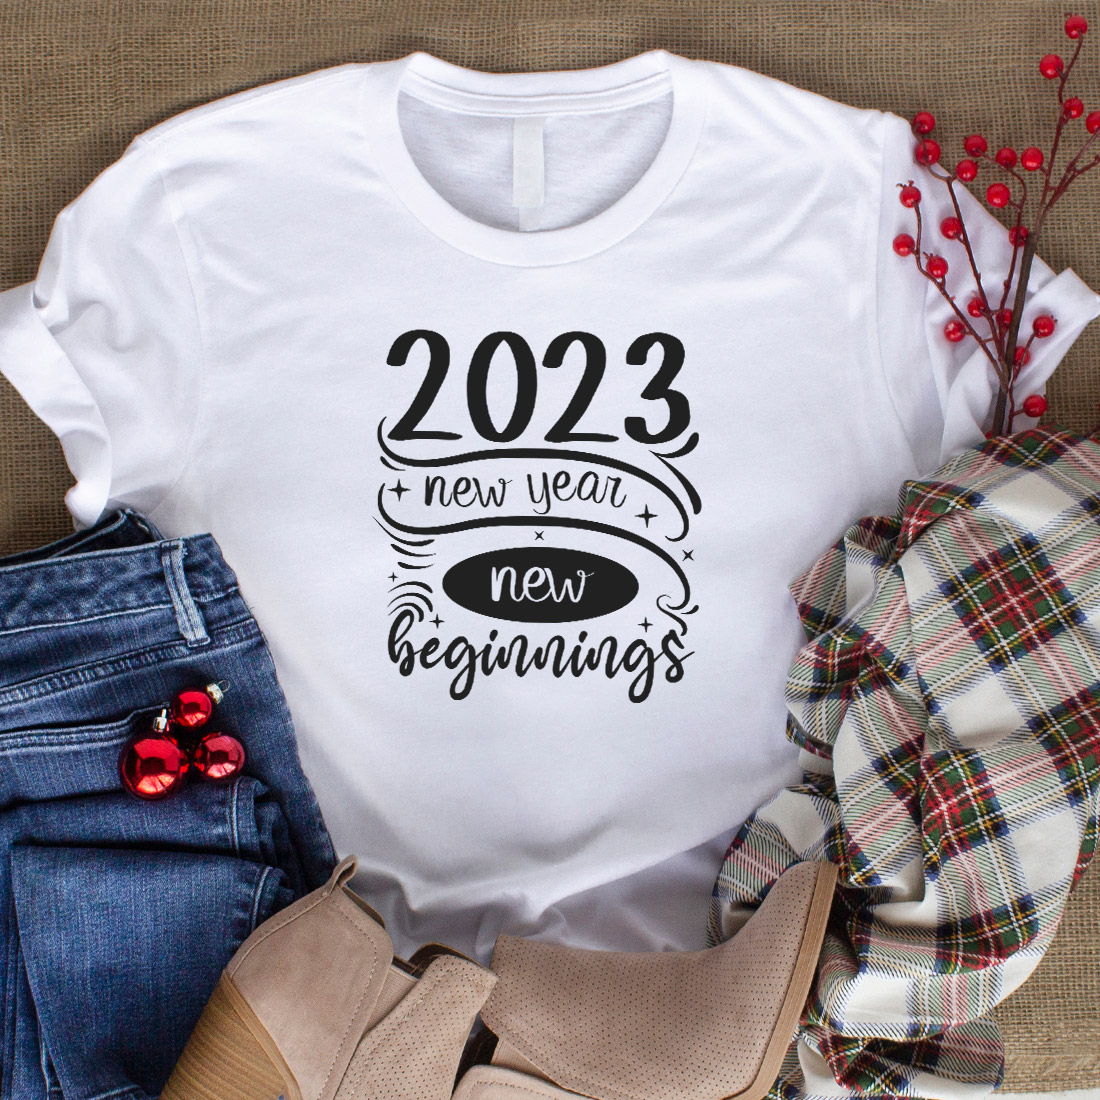 Image of a white t-shirt with a beautiful inscription 2023 new year new beginnings